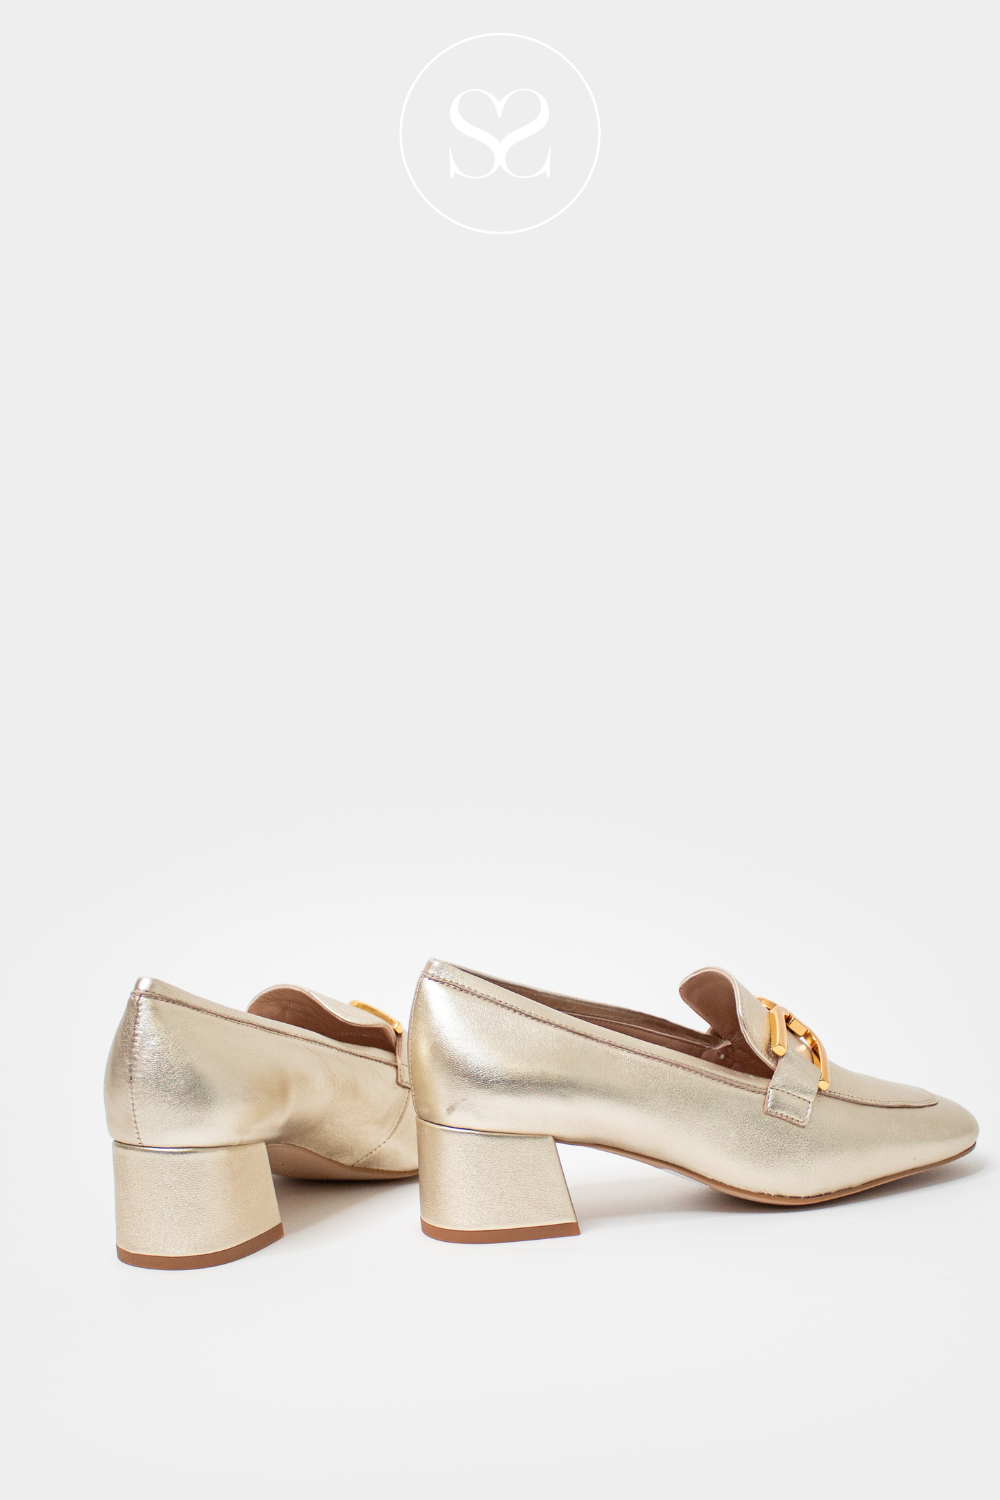 UNISA LOSIE GOLD LEATHER LOW BLOCK HEEL SLIP ON SHOE WITH GOLD BUCKLE